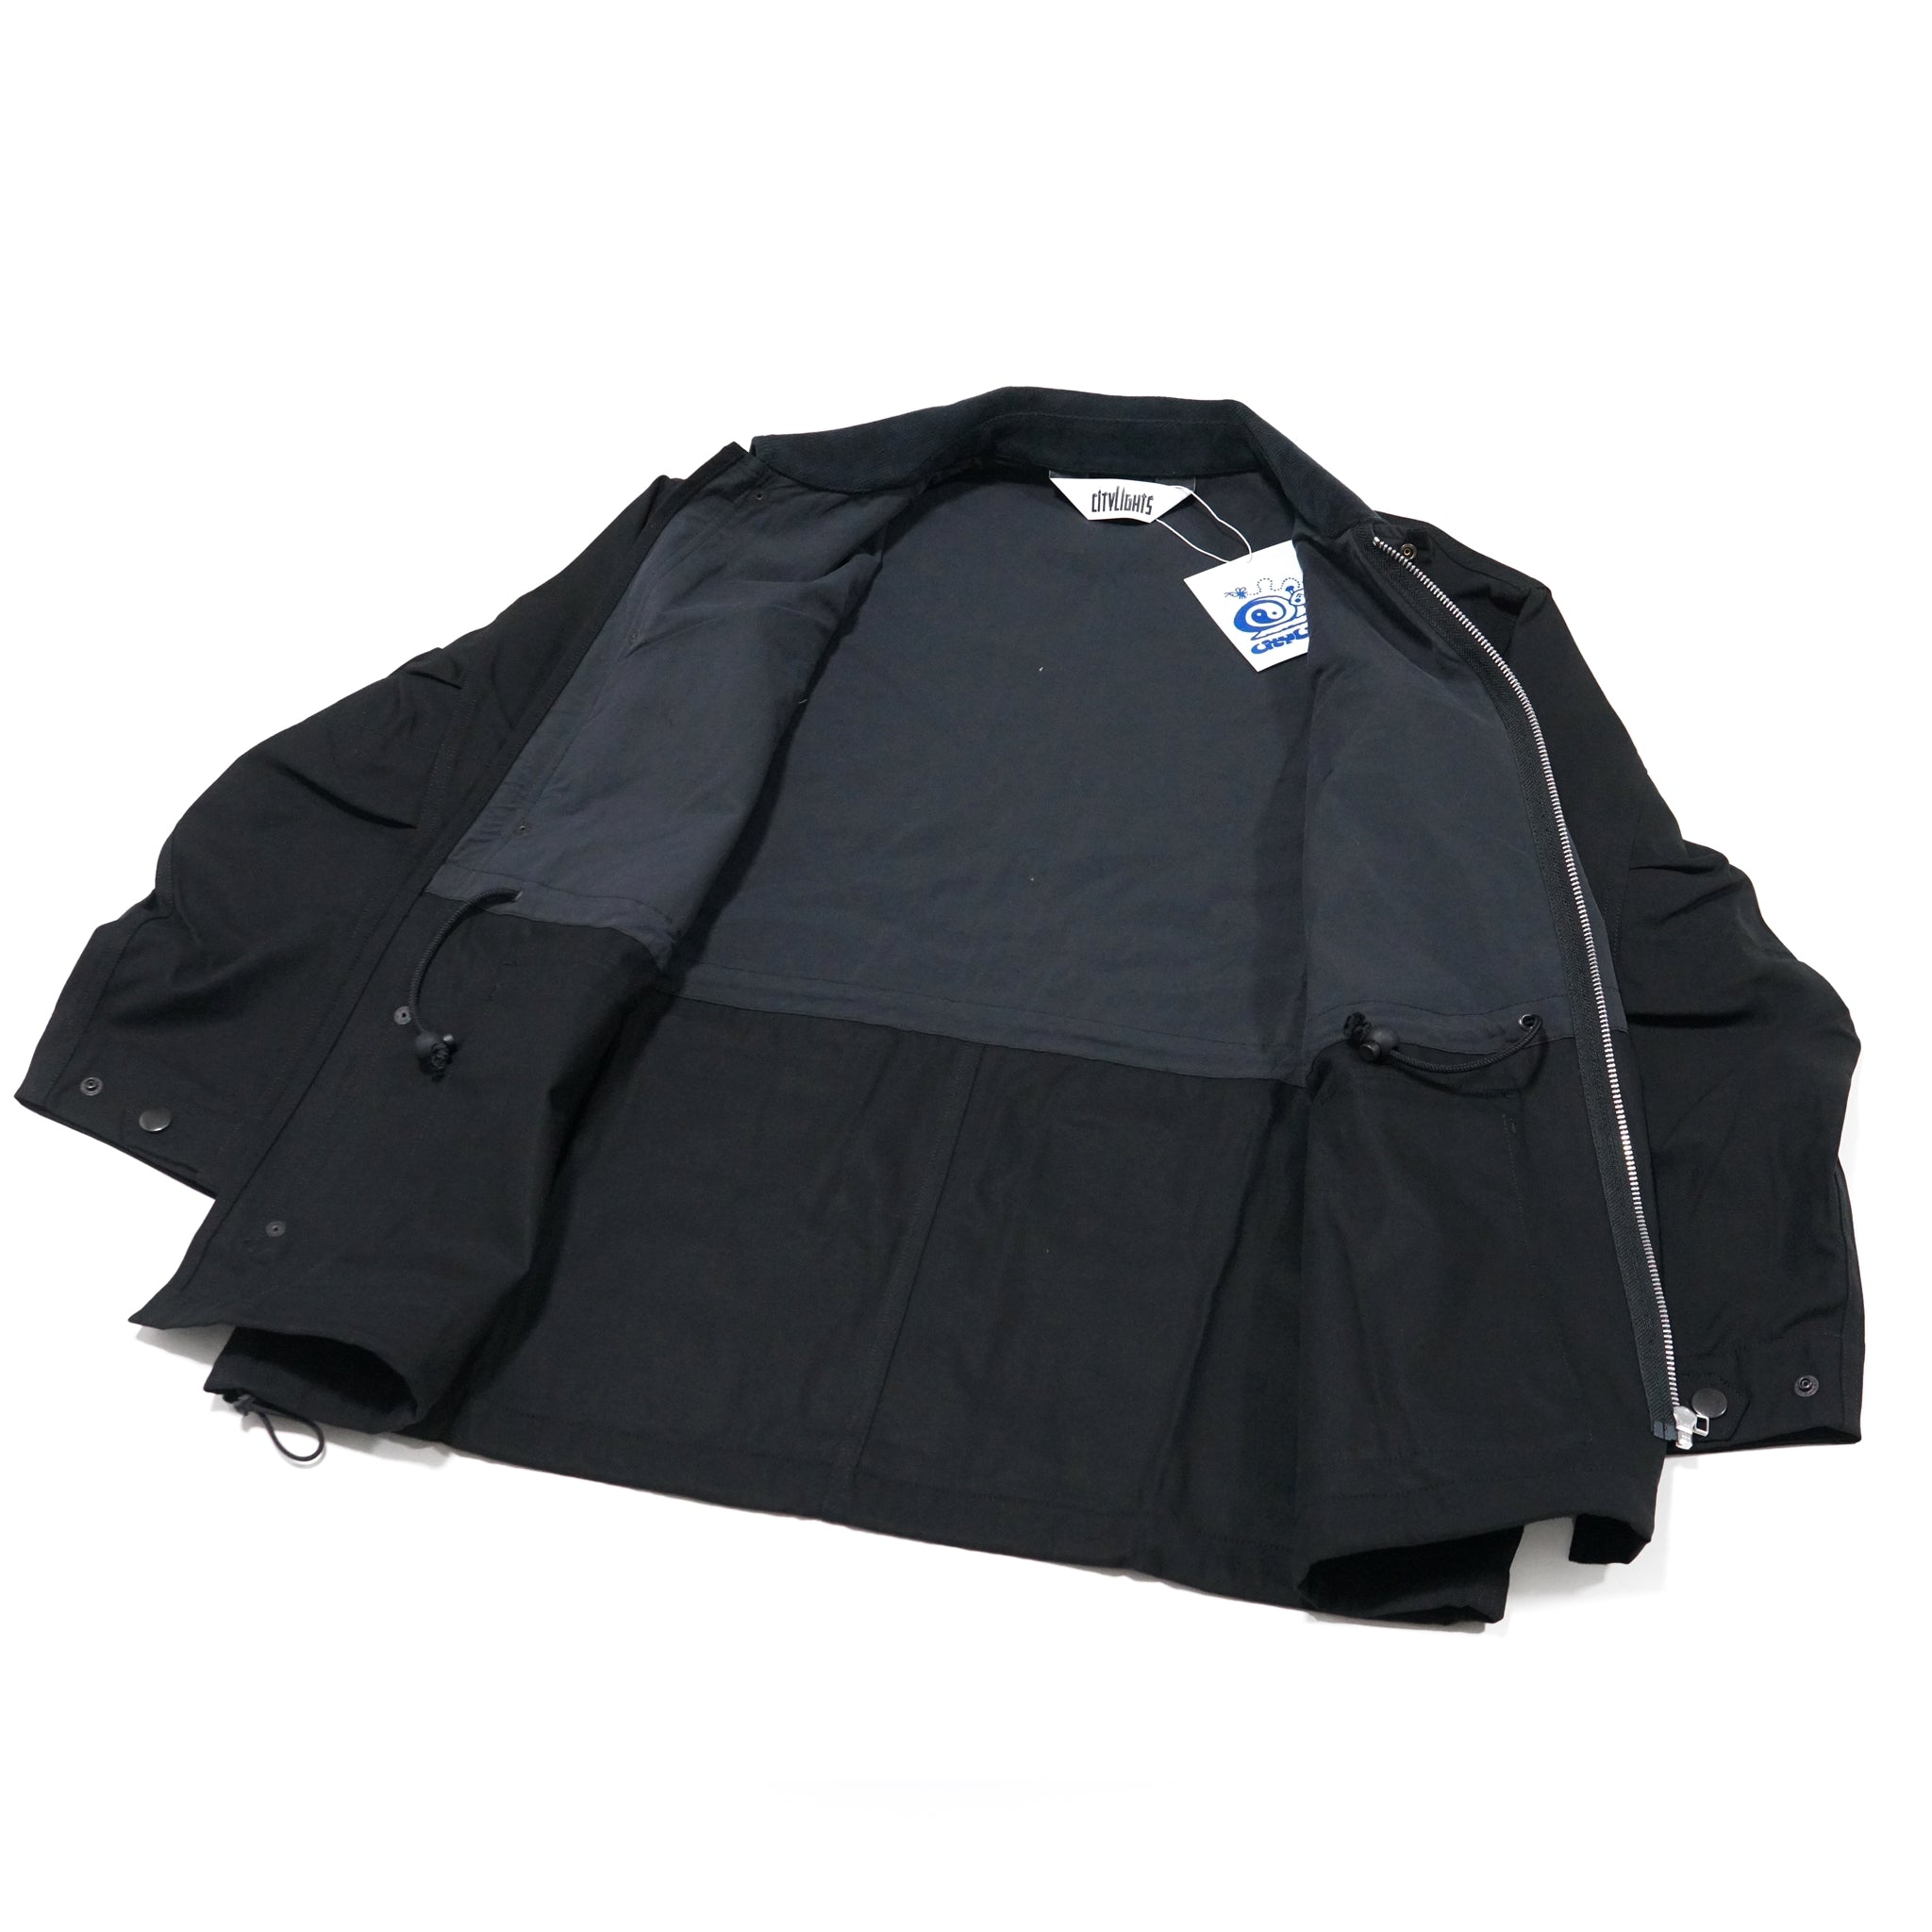 Name: JUNGLE JACKET-Black | Color: Black | Size: One Size 【CITYLIGHTS PRODUCTS_シティライツプロダクツ】